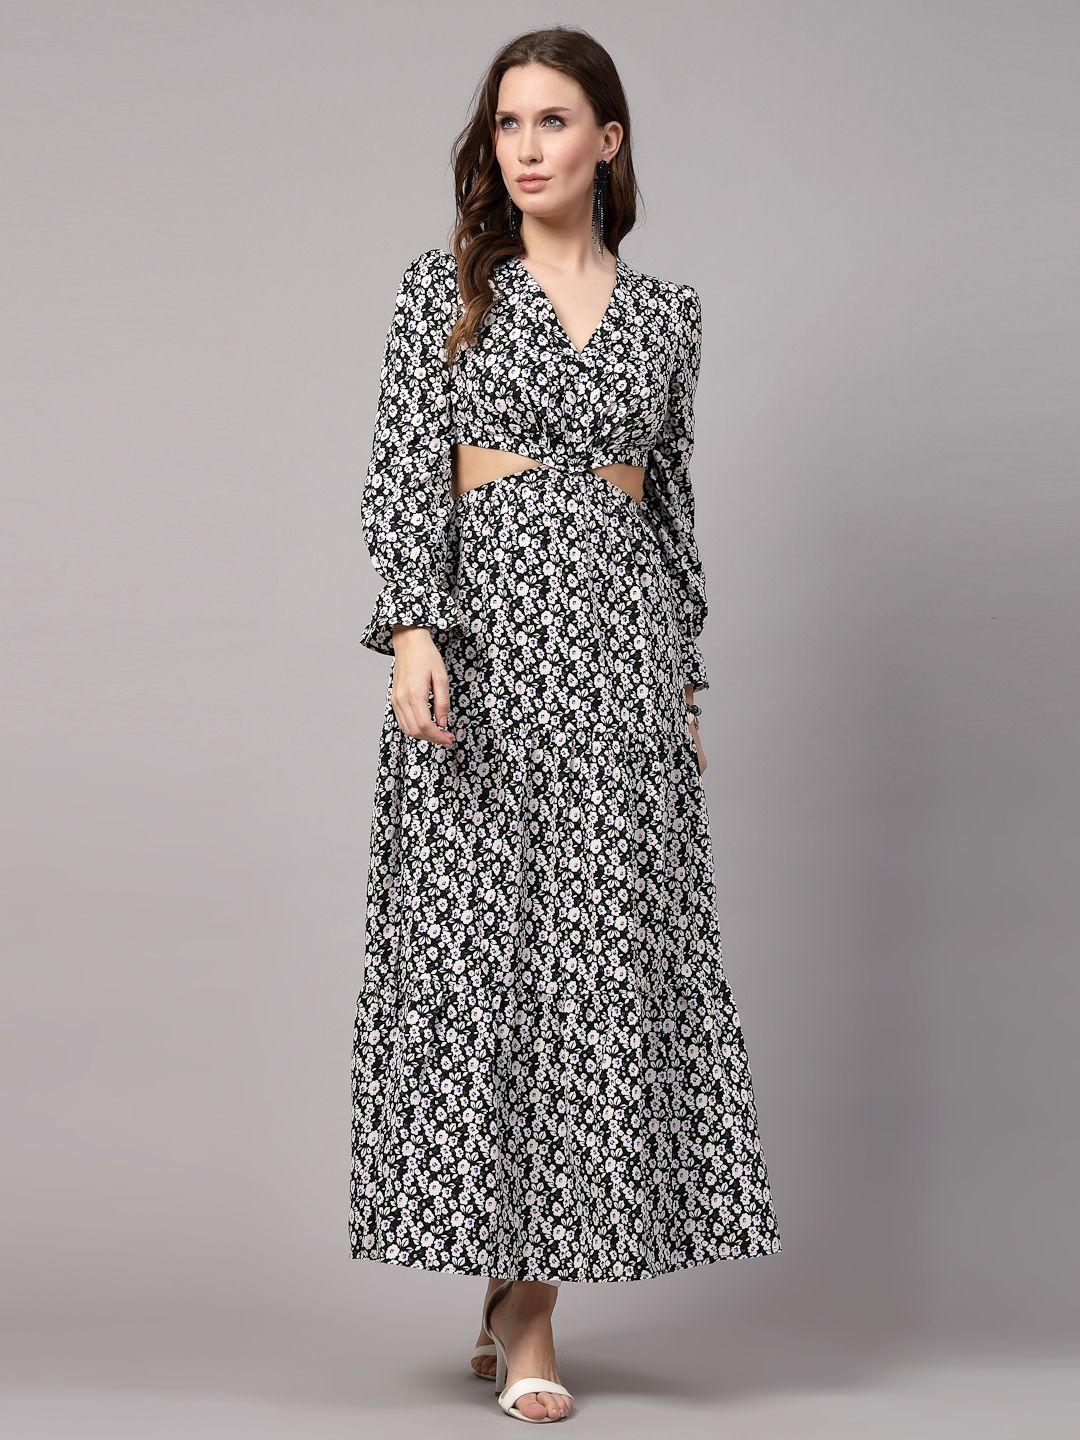 aayu-floral-printed-v-neck-bell-sleeve-maxi-dress